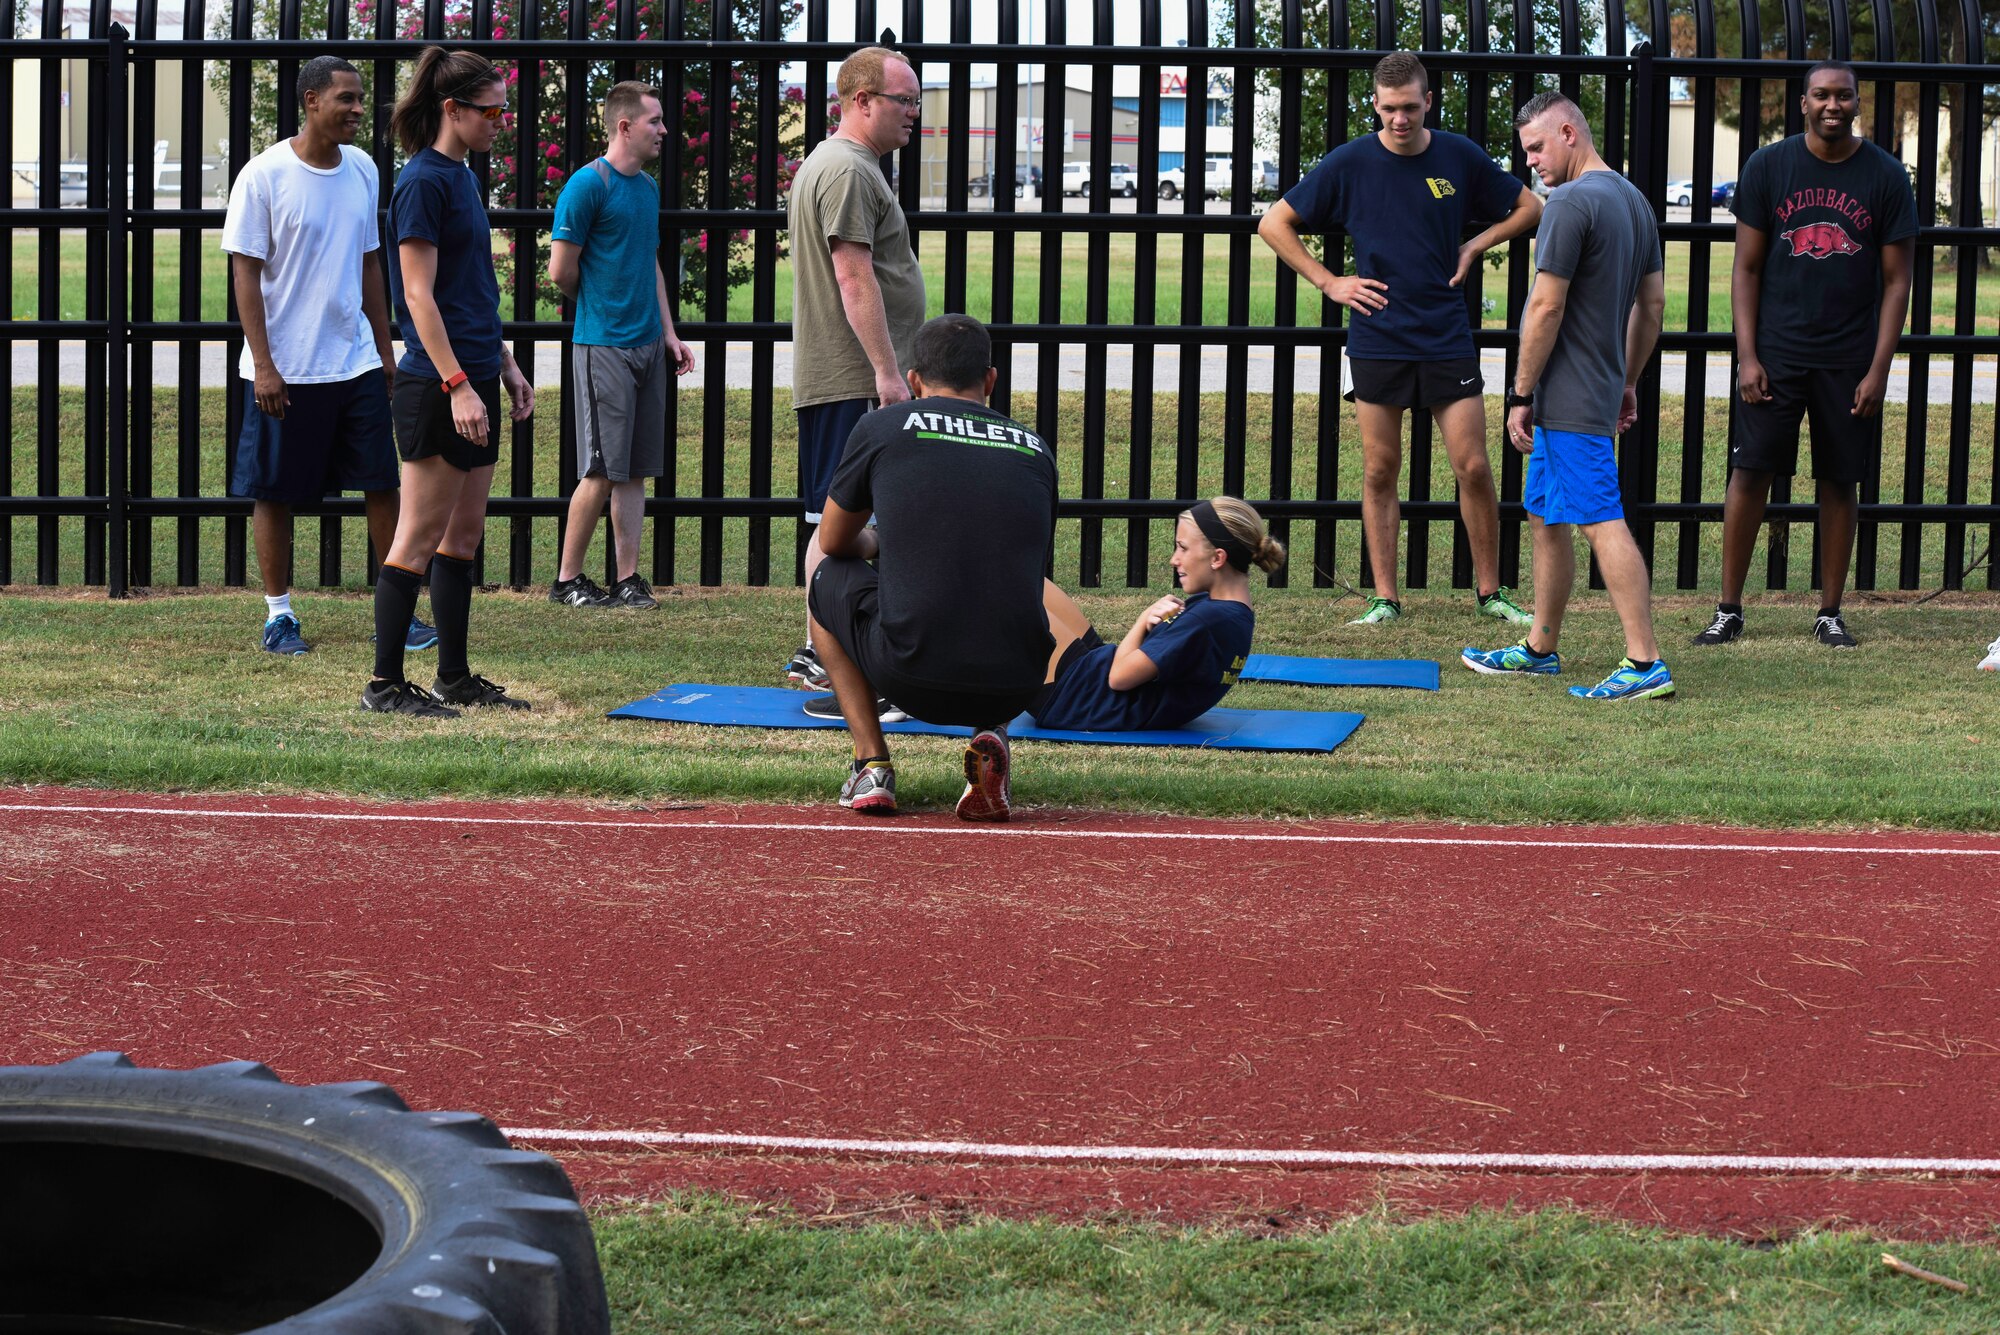 Members of the 188th Wing participate in the Wingman Olympics August 8, 2016, at Ebbing Air National Guard Base, Fort Smith, Ark. The Wingman Olympics is an event dedicated to promoting resiliency, team building and esprit de corps and encourages physical, spiritual and emotional well-being through team events and activities. This year’s Wingman Olympics included a 1.5 mile run, a casting contest, free throw contest, horseshoes and bean bag toss, a 1 mile sprint relay and a volleyball tournament. (U.S. Air National Guard photo by Capt. Holli Nelson)